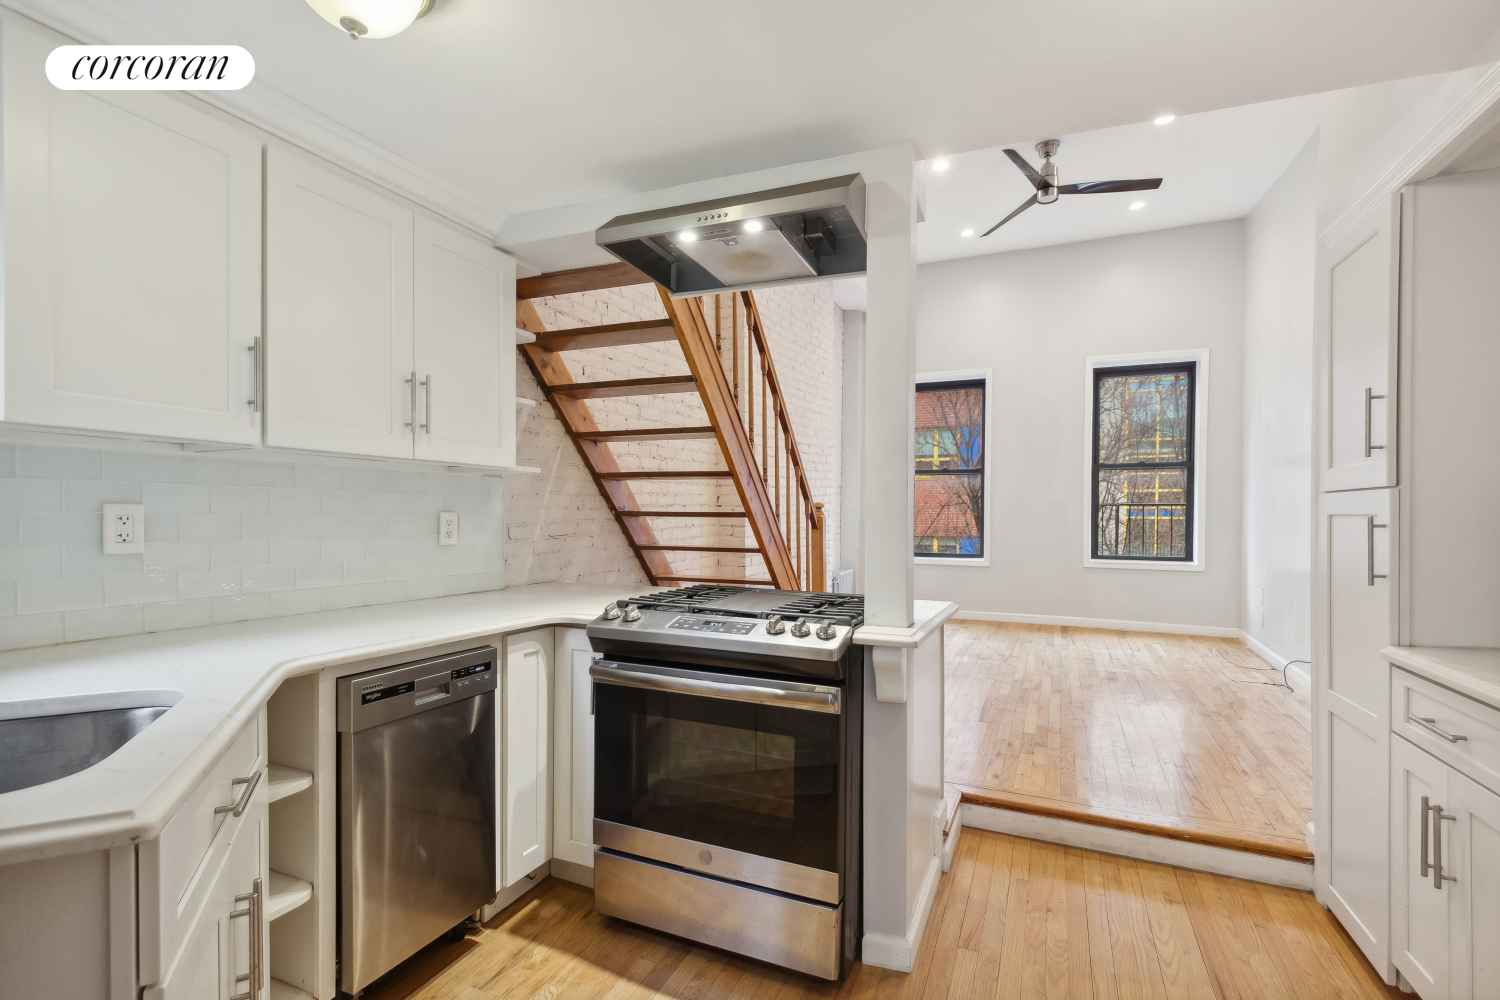 333 East 92nd Street 5A, Yorkville, Upper East Side, NYC - 2 Bedrooms  
2 Bathrooms  
4 Rooms - 